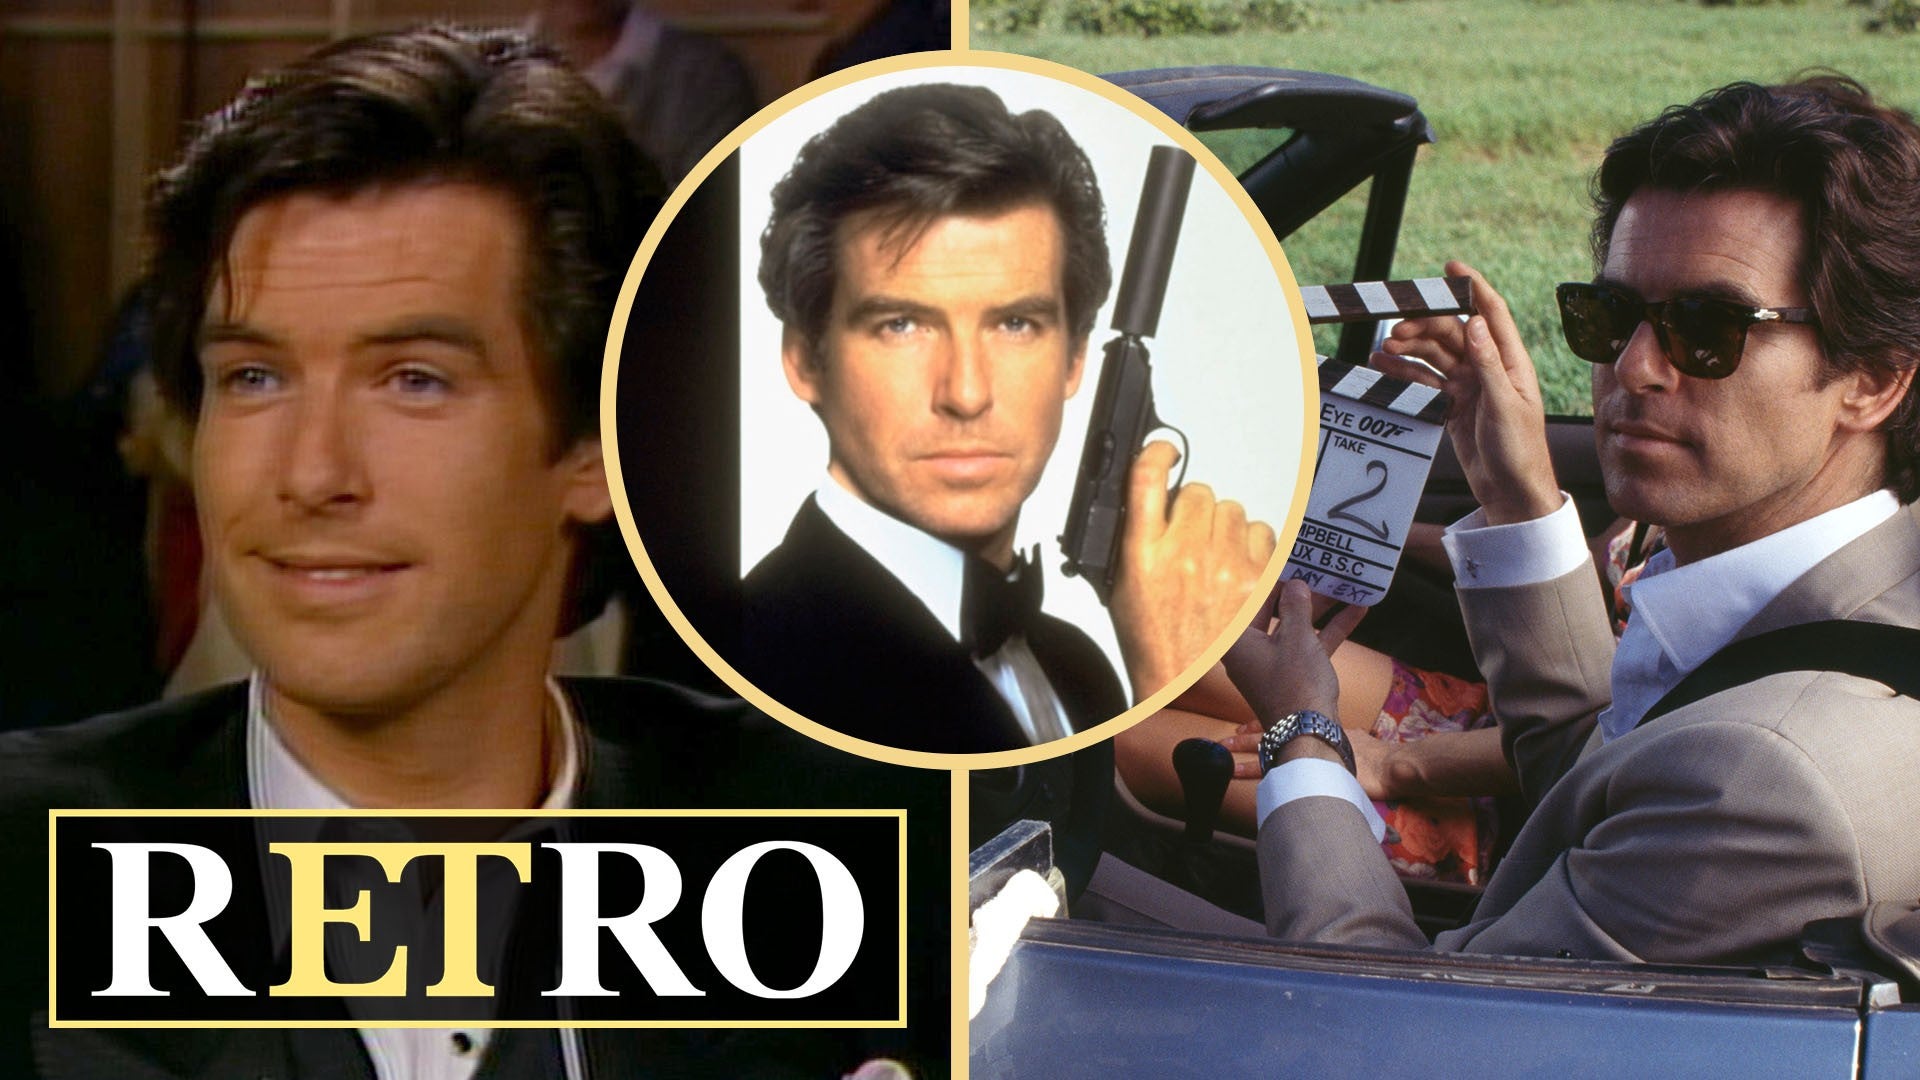 Pierce Brosnan Shades 'Not Time to Die' and Shuts Down Next Bond Actor